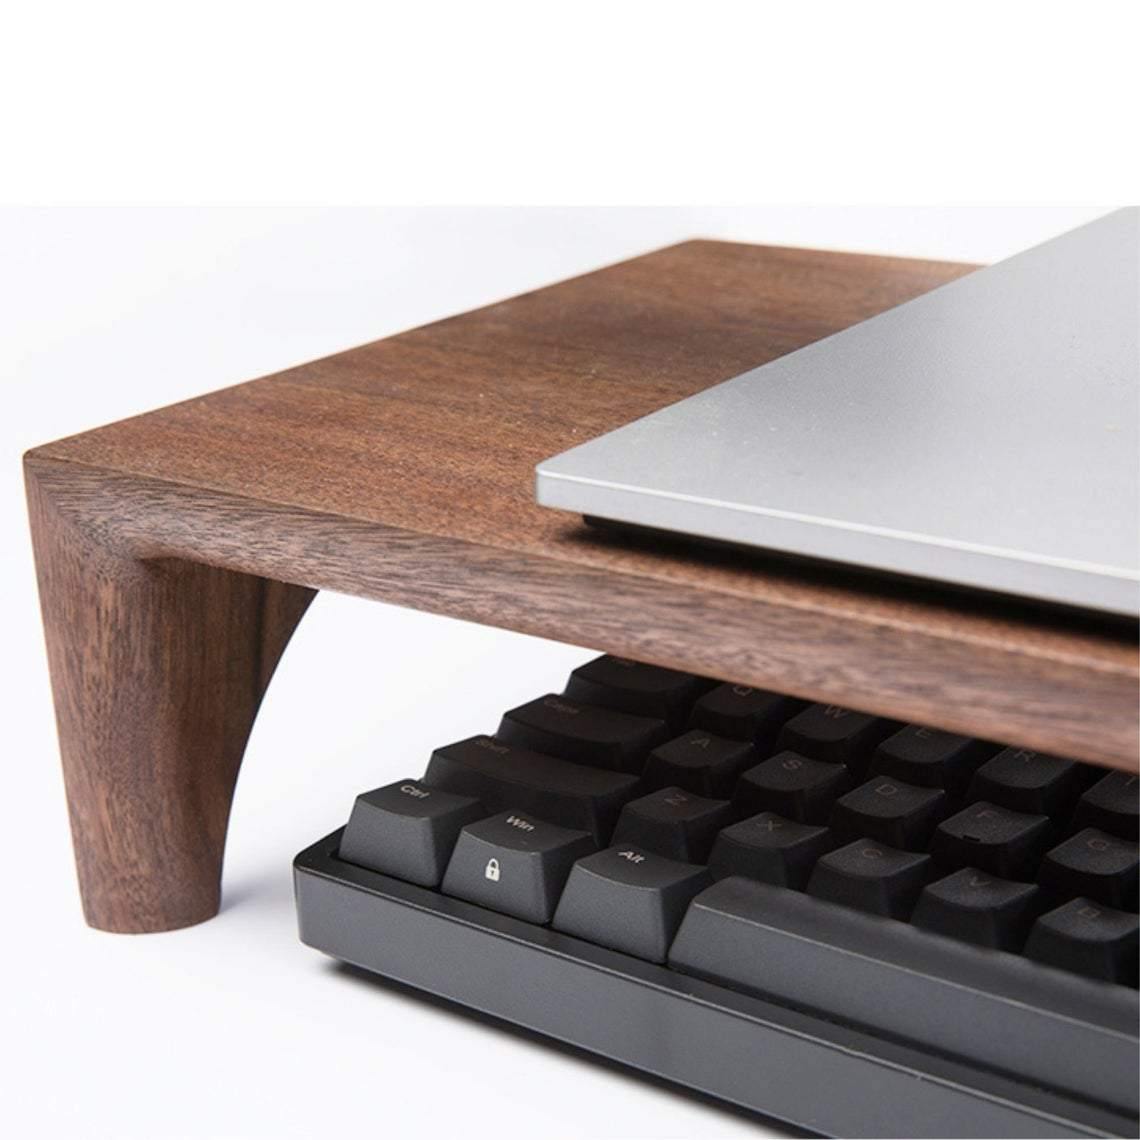 Walnut monitor stand for iMac, wood laptop stand, elevated computer display stand, solid walnut wood table table support for tv, desk stand